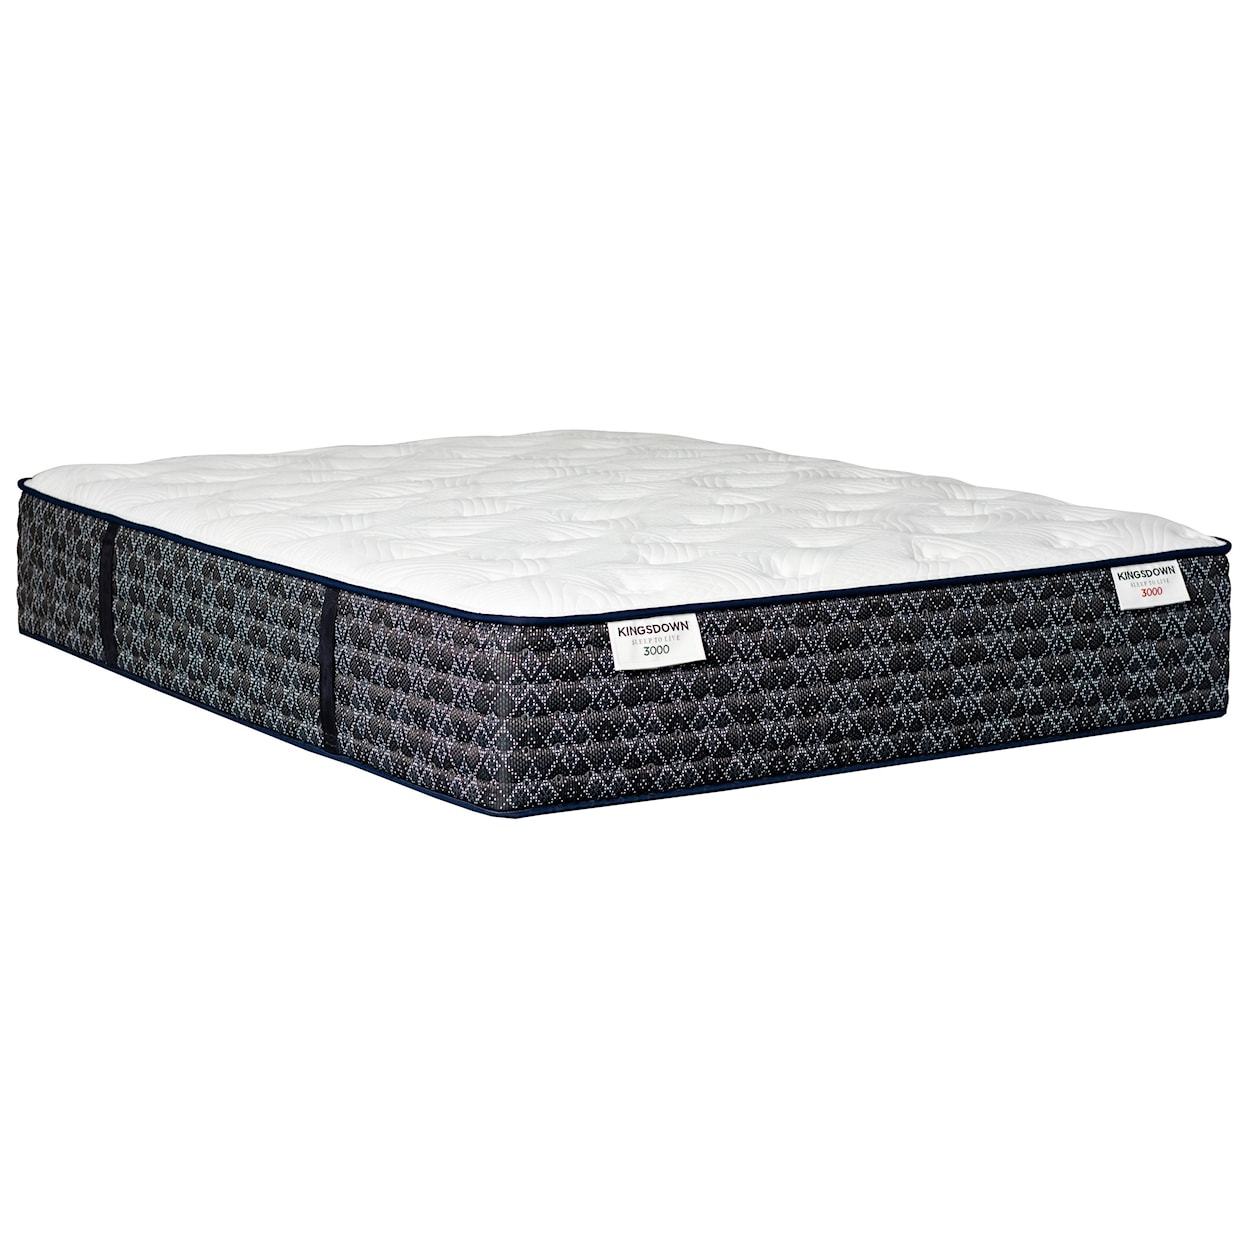 Kingsdown Sleep to Live 3000 Green Red Full Pocketed Coil Mattress